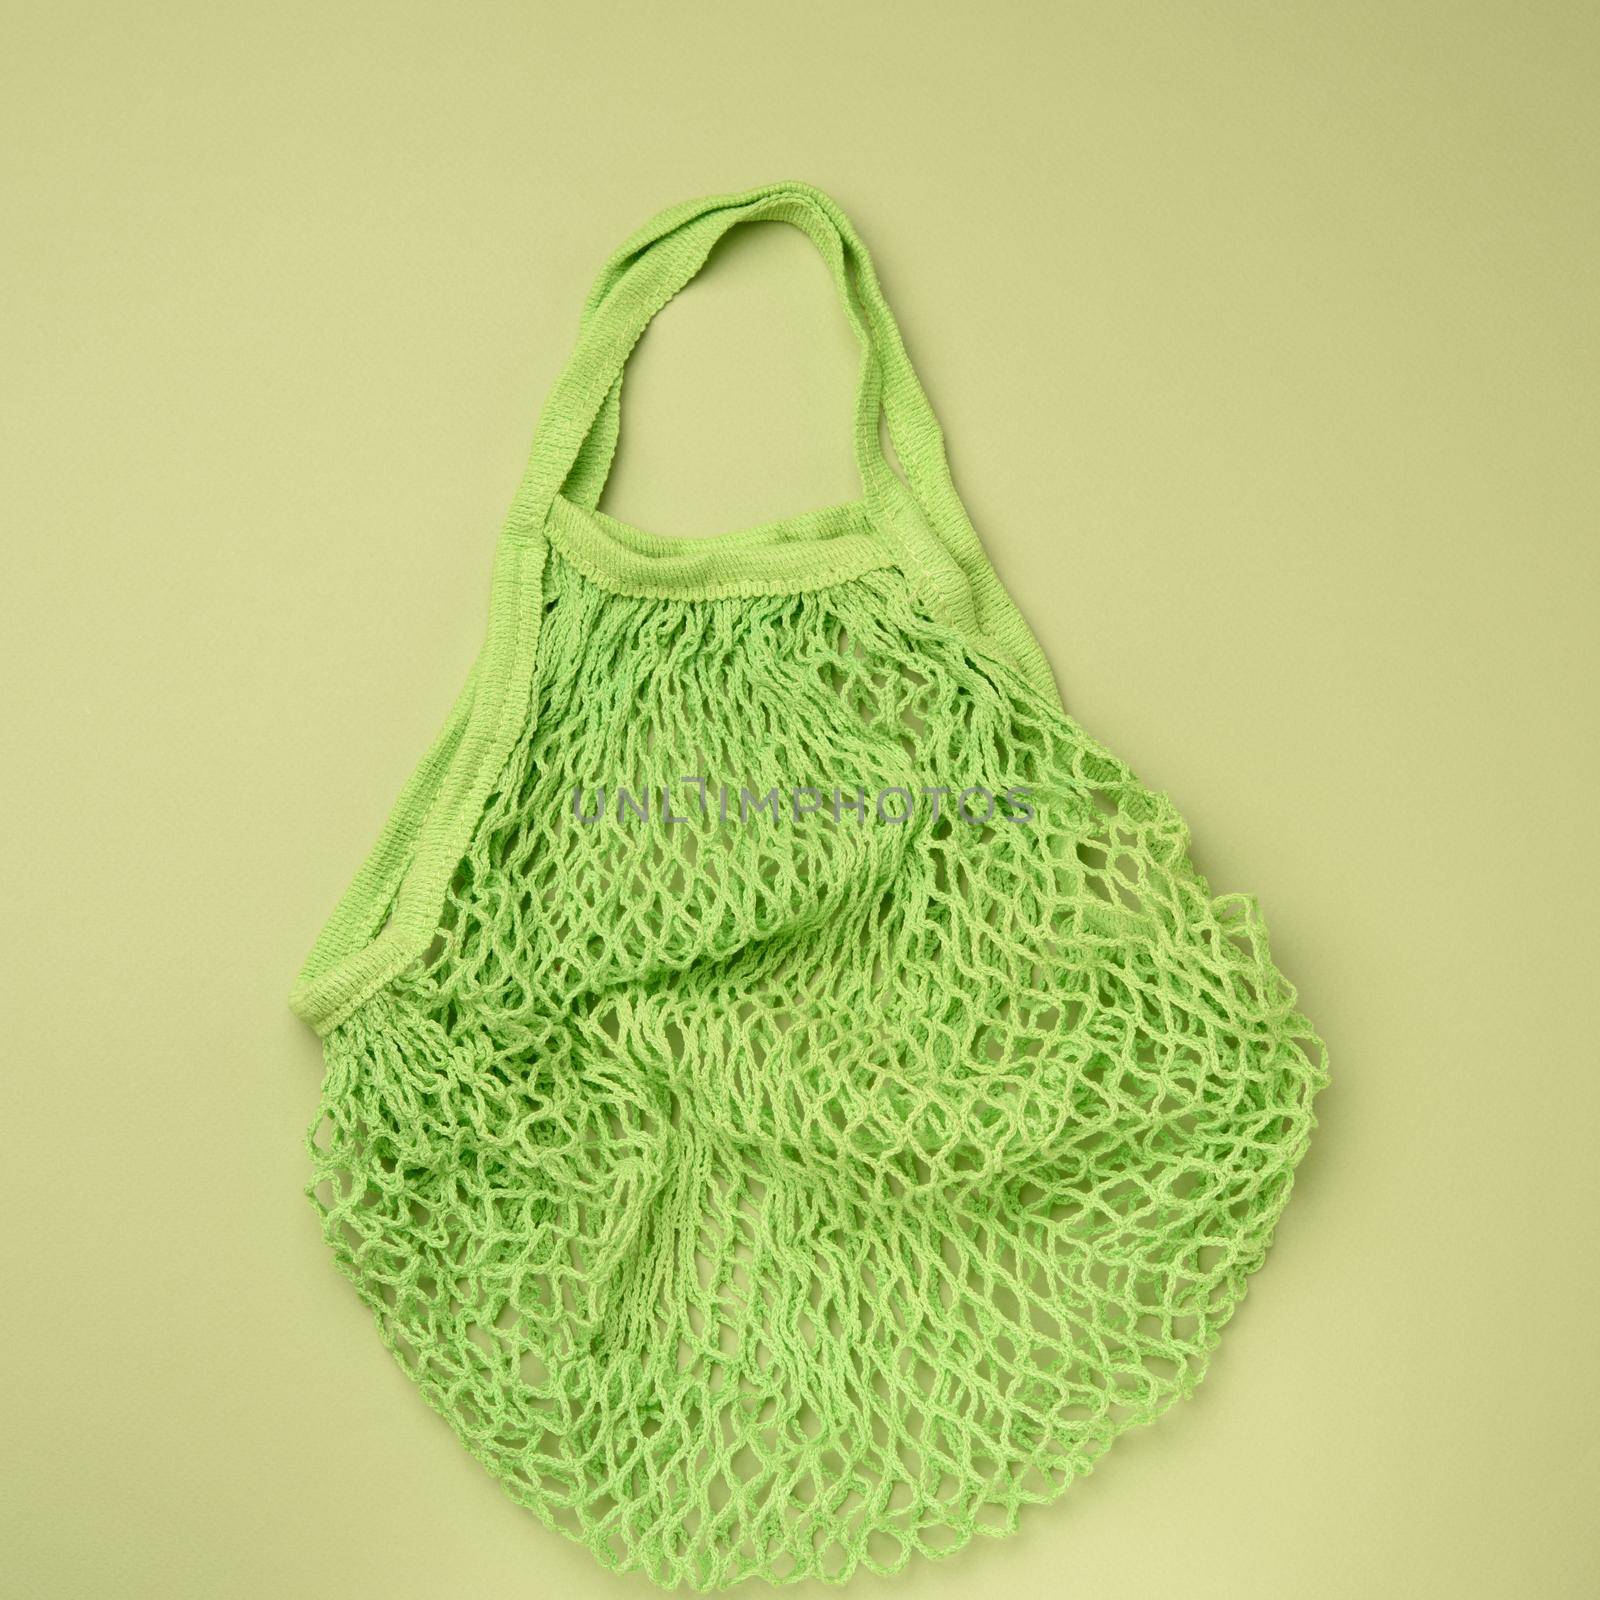 empty green reusable string bag woven from thread on a green background by ndanko